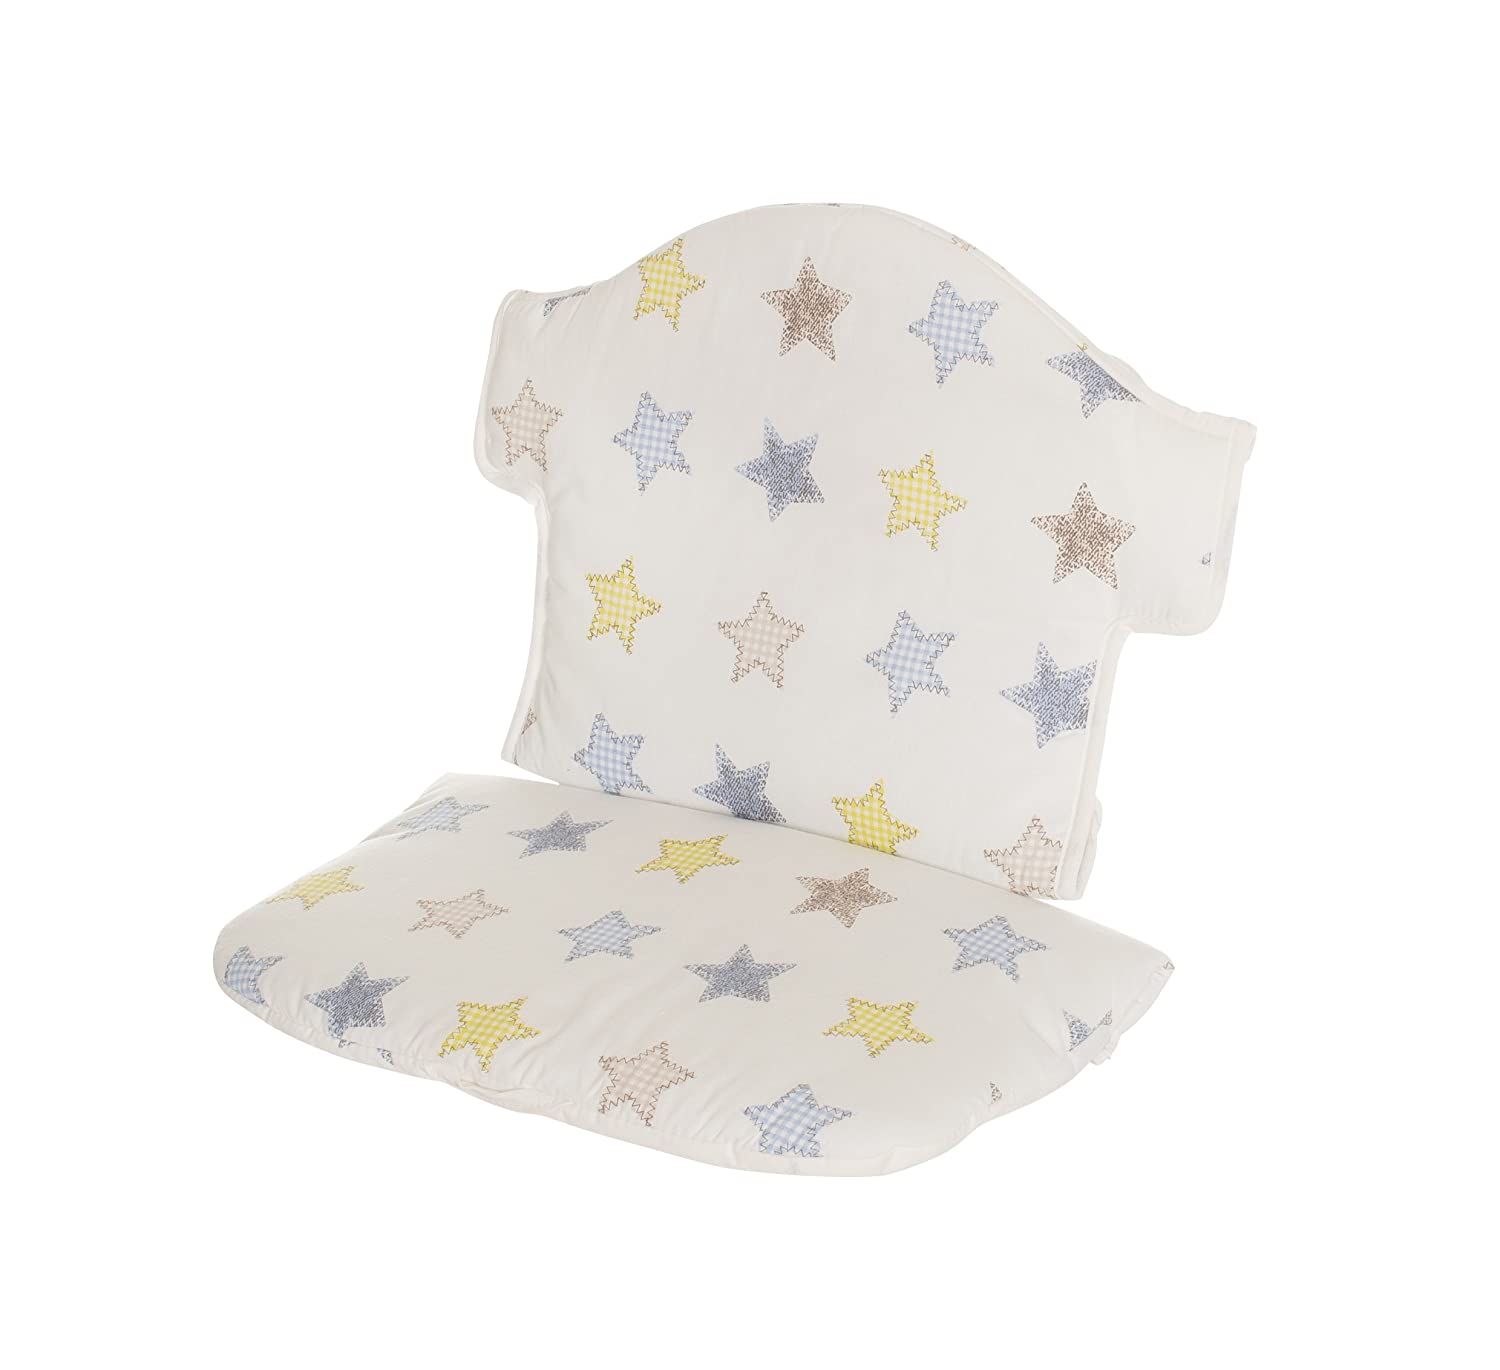 Geuther 4743 Seat Reducer For Swing High Chair Fabric Stars